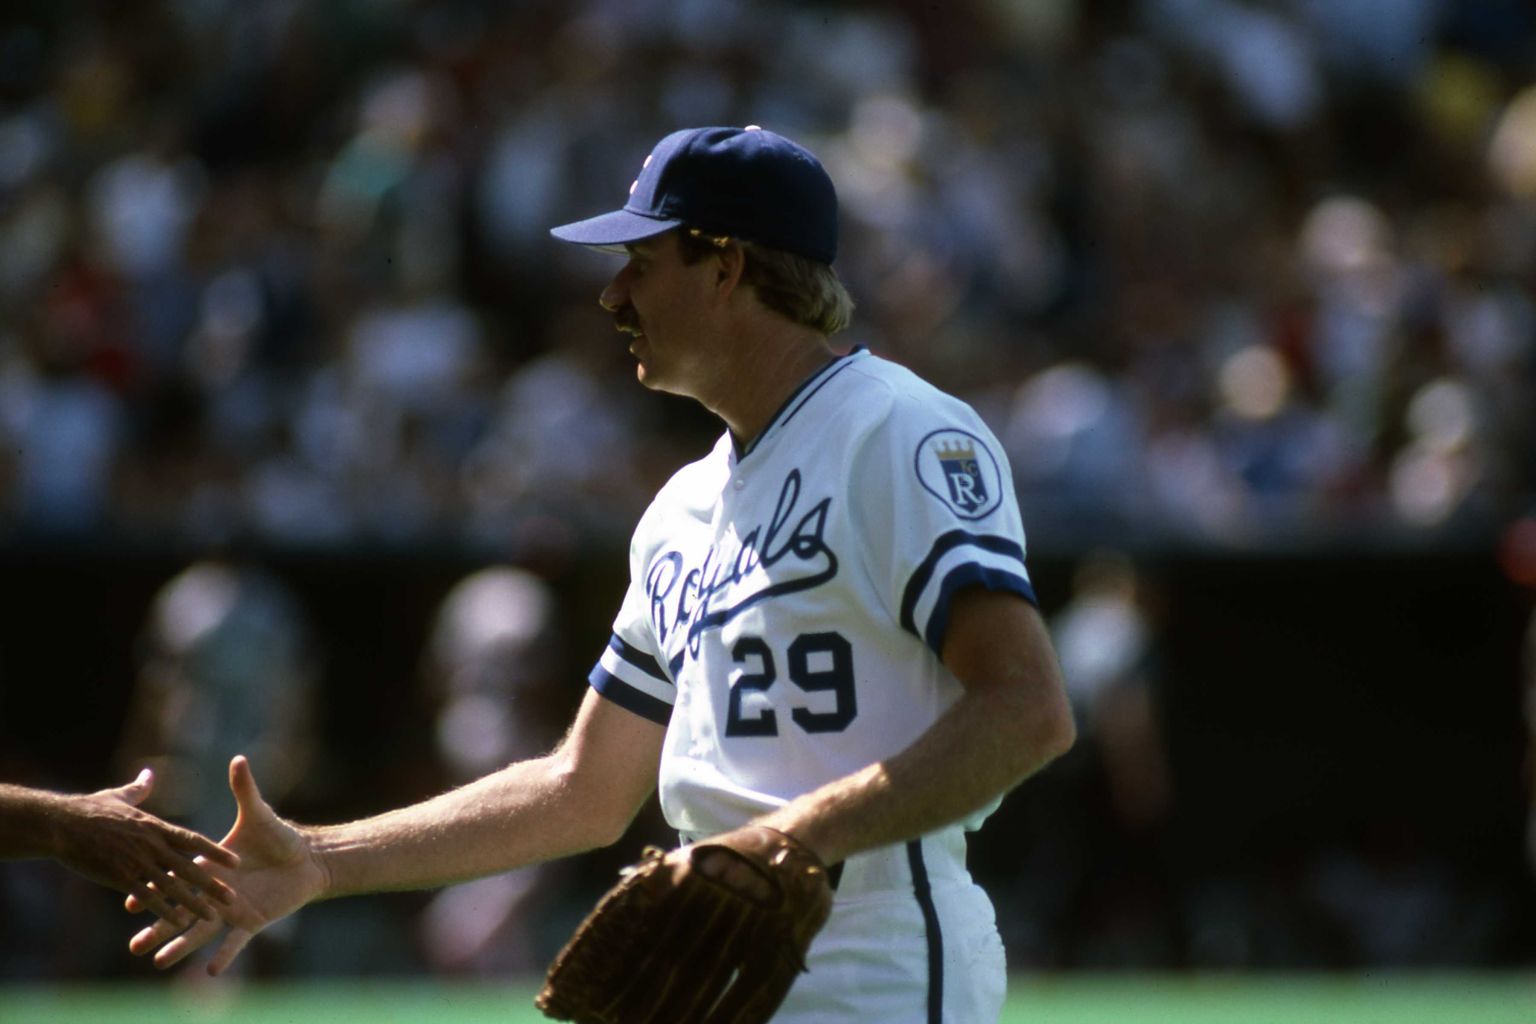 Not in Hall of Fame - 6. Dan Quisenberry